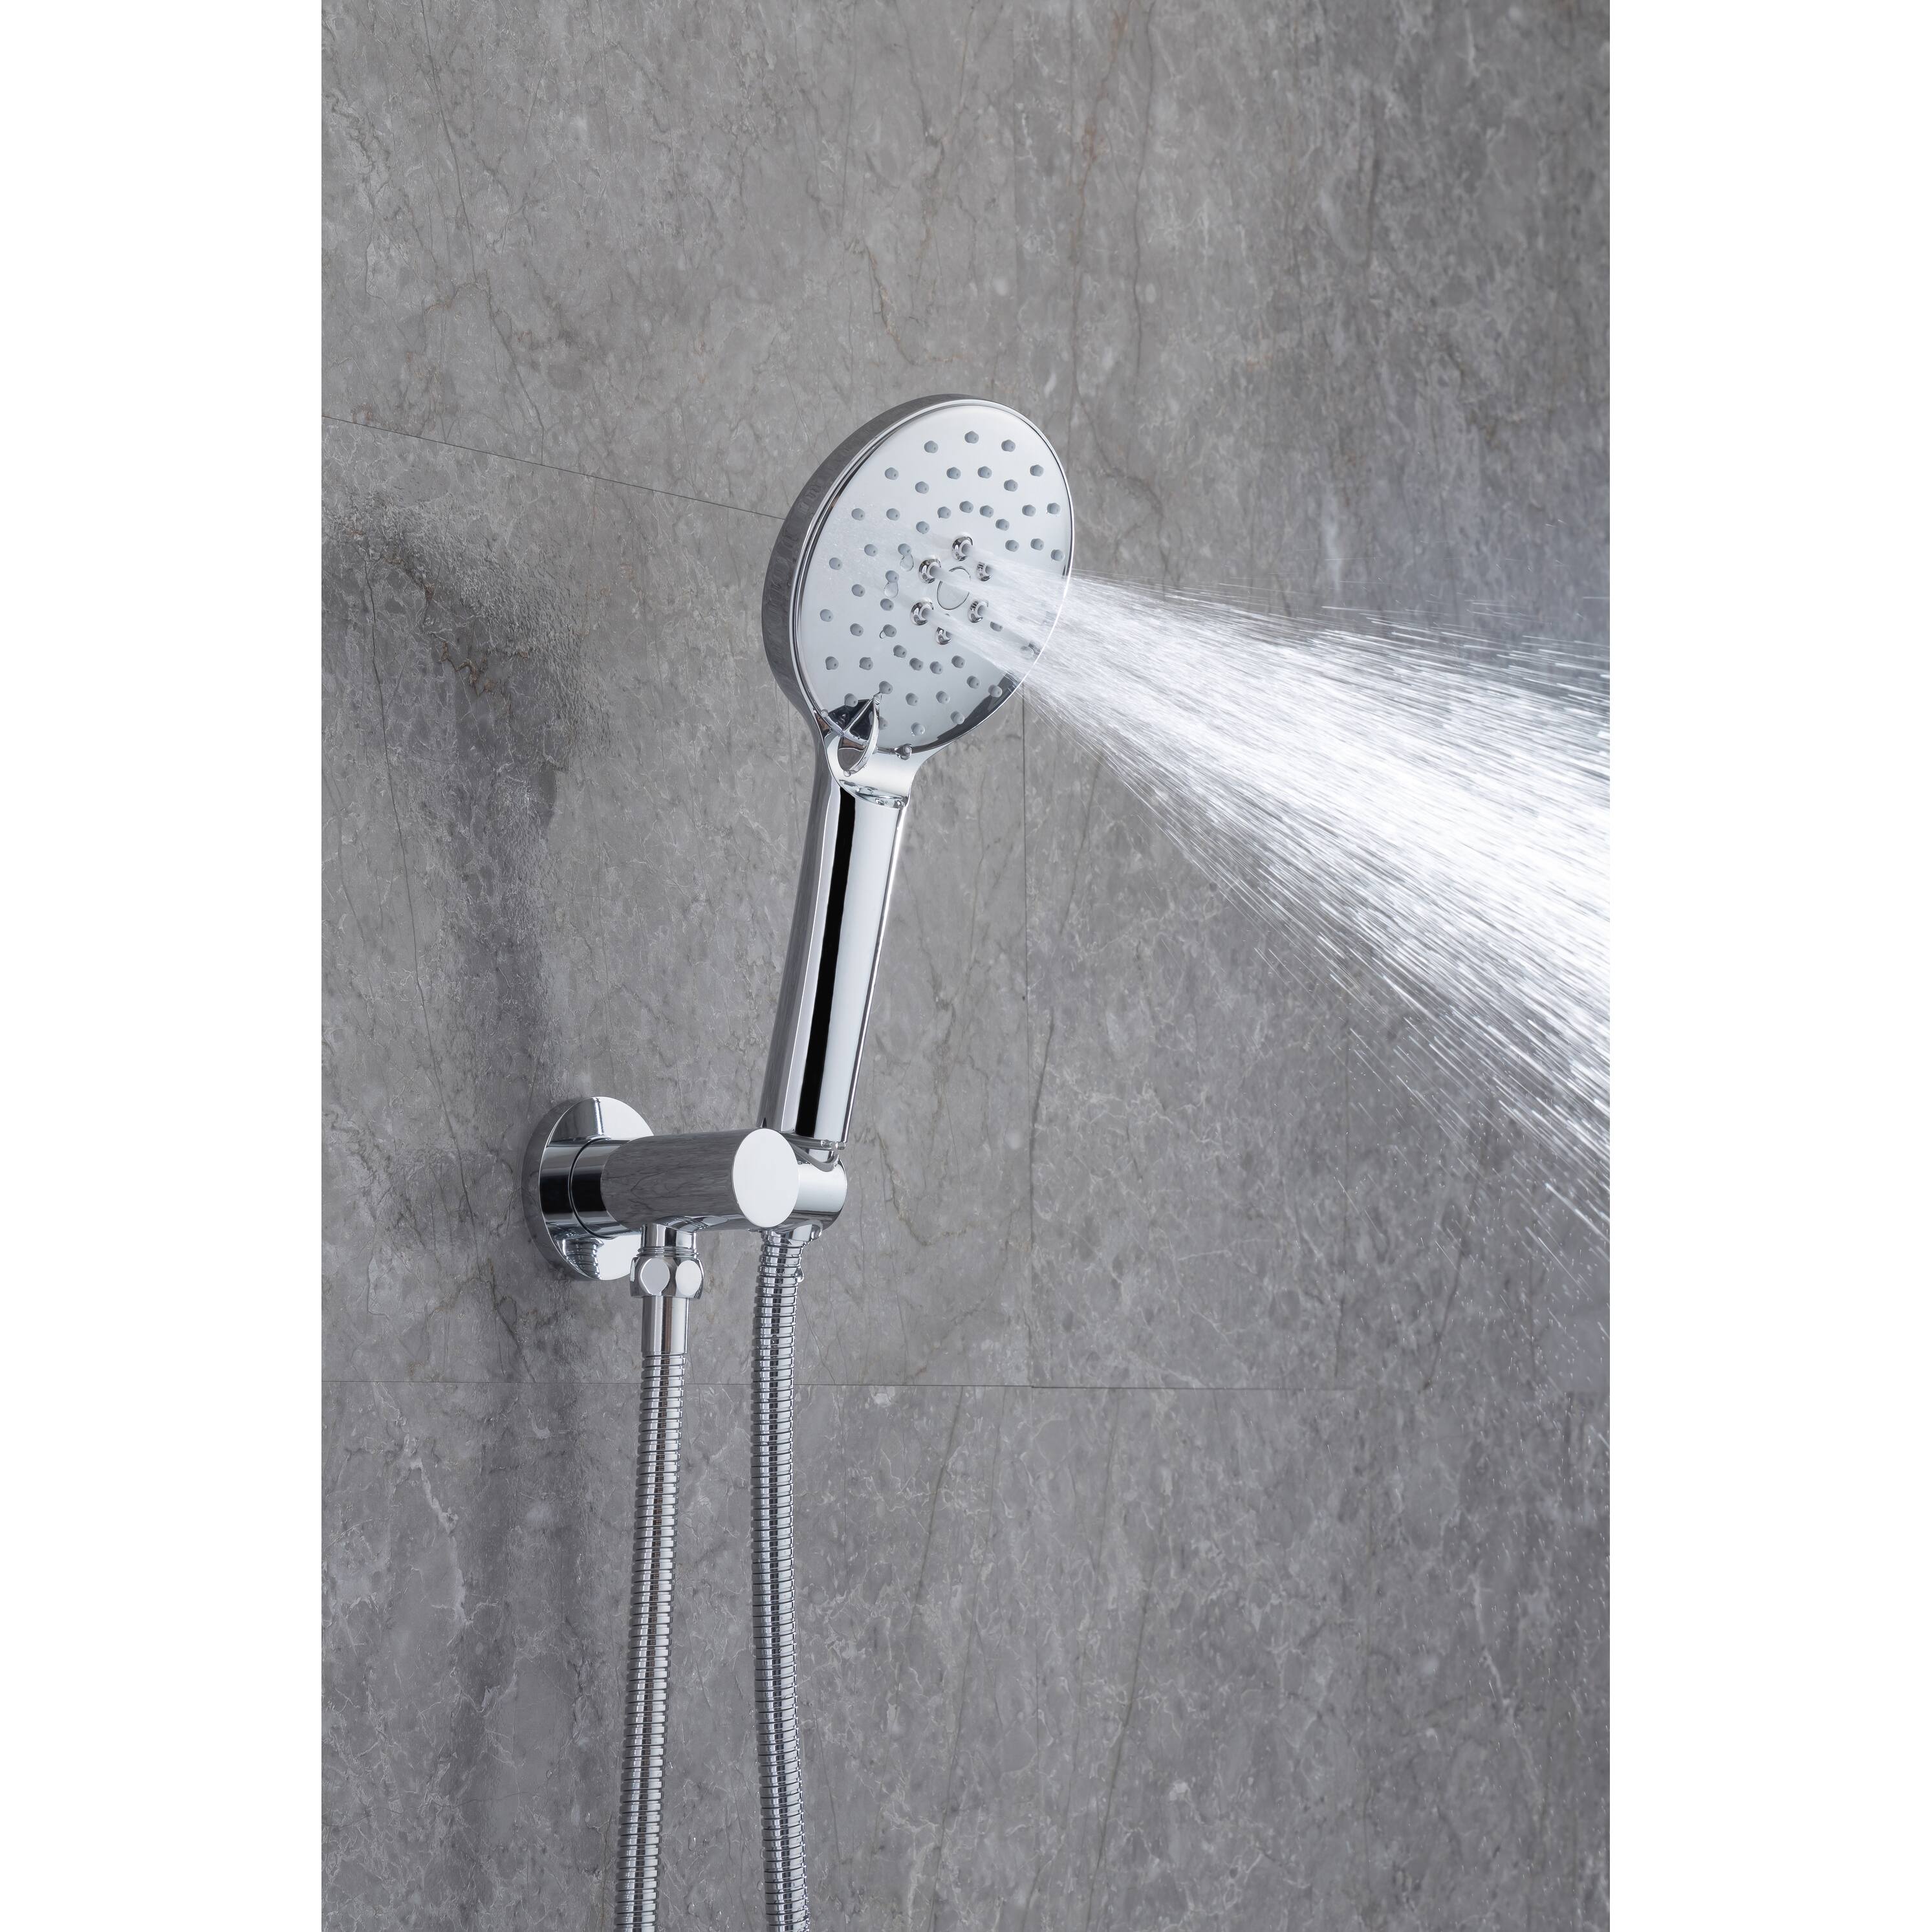 10 Inch Rain Shower Head with Handheld Spray, Wall Mounted Round hower System, Rough-in Valve Included